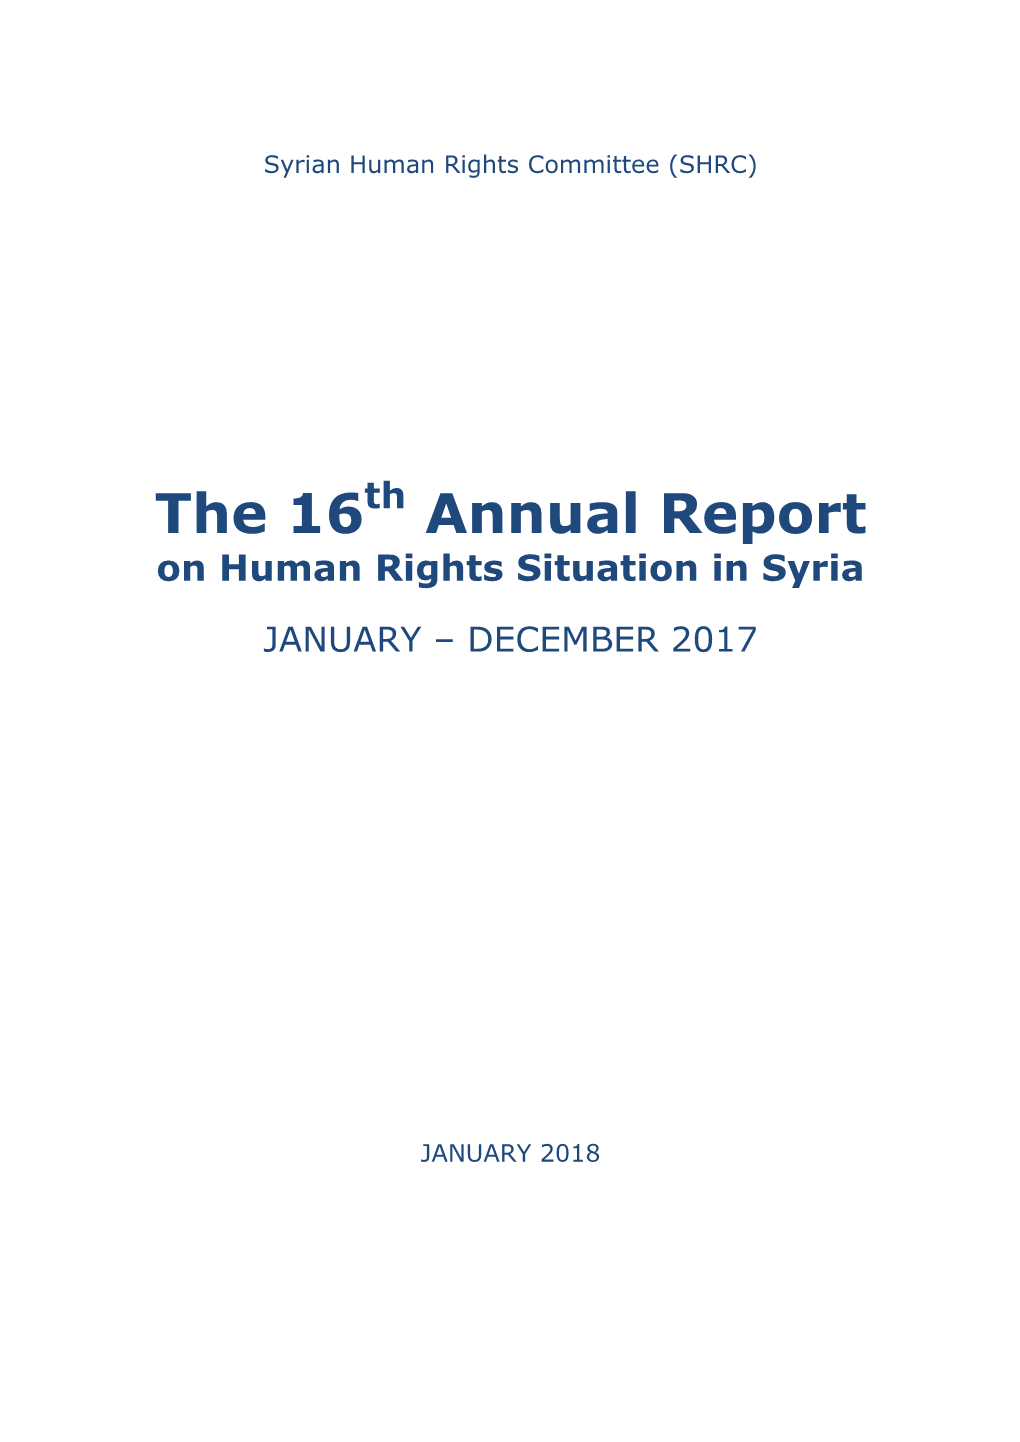 The 16 Annual Report on Human Rights Situation in Syria